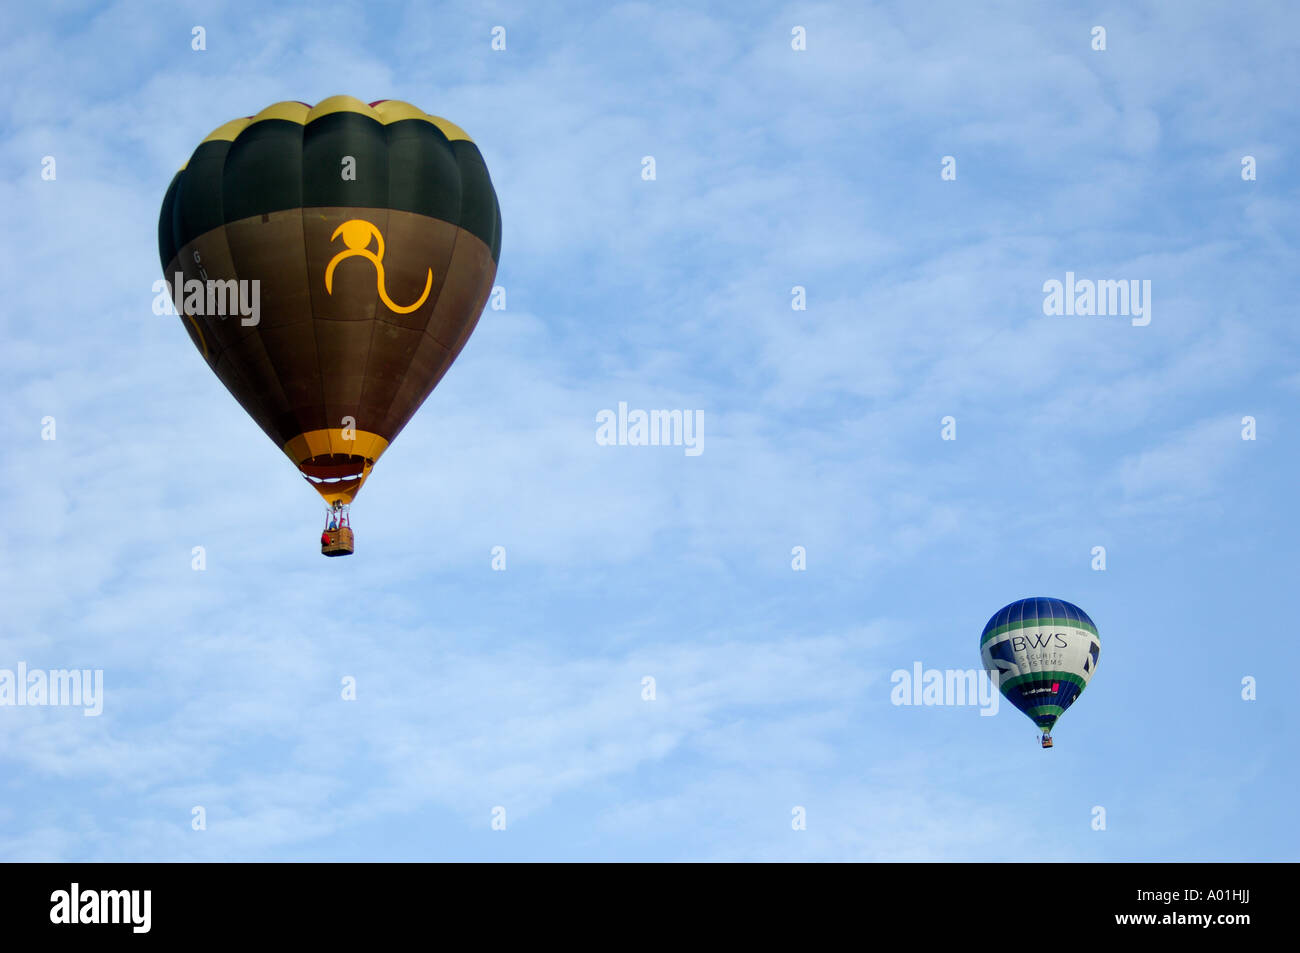 Two hot air balloons in flight against a pale blue sky Stock Photo